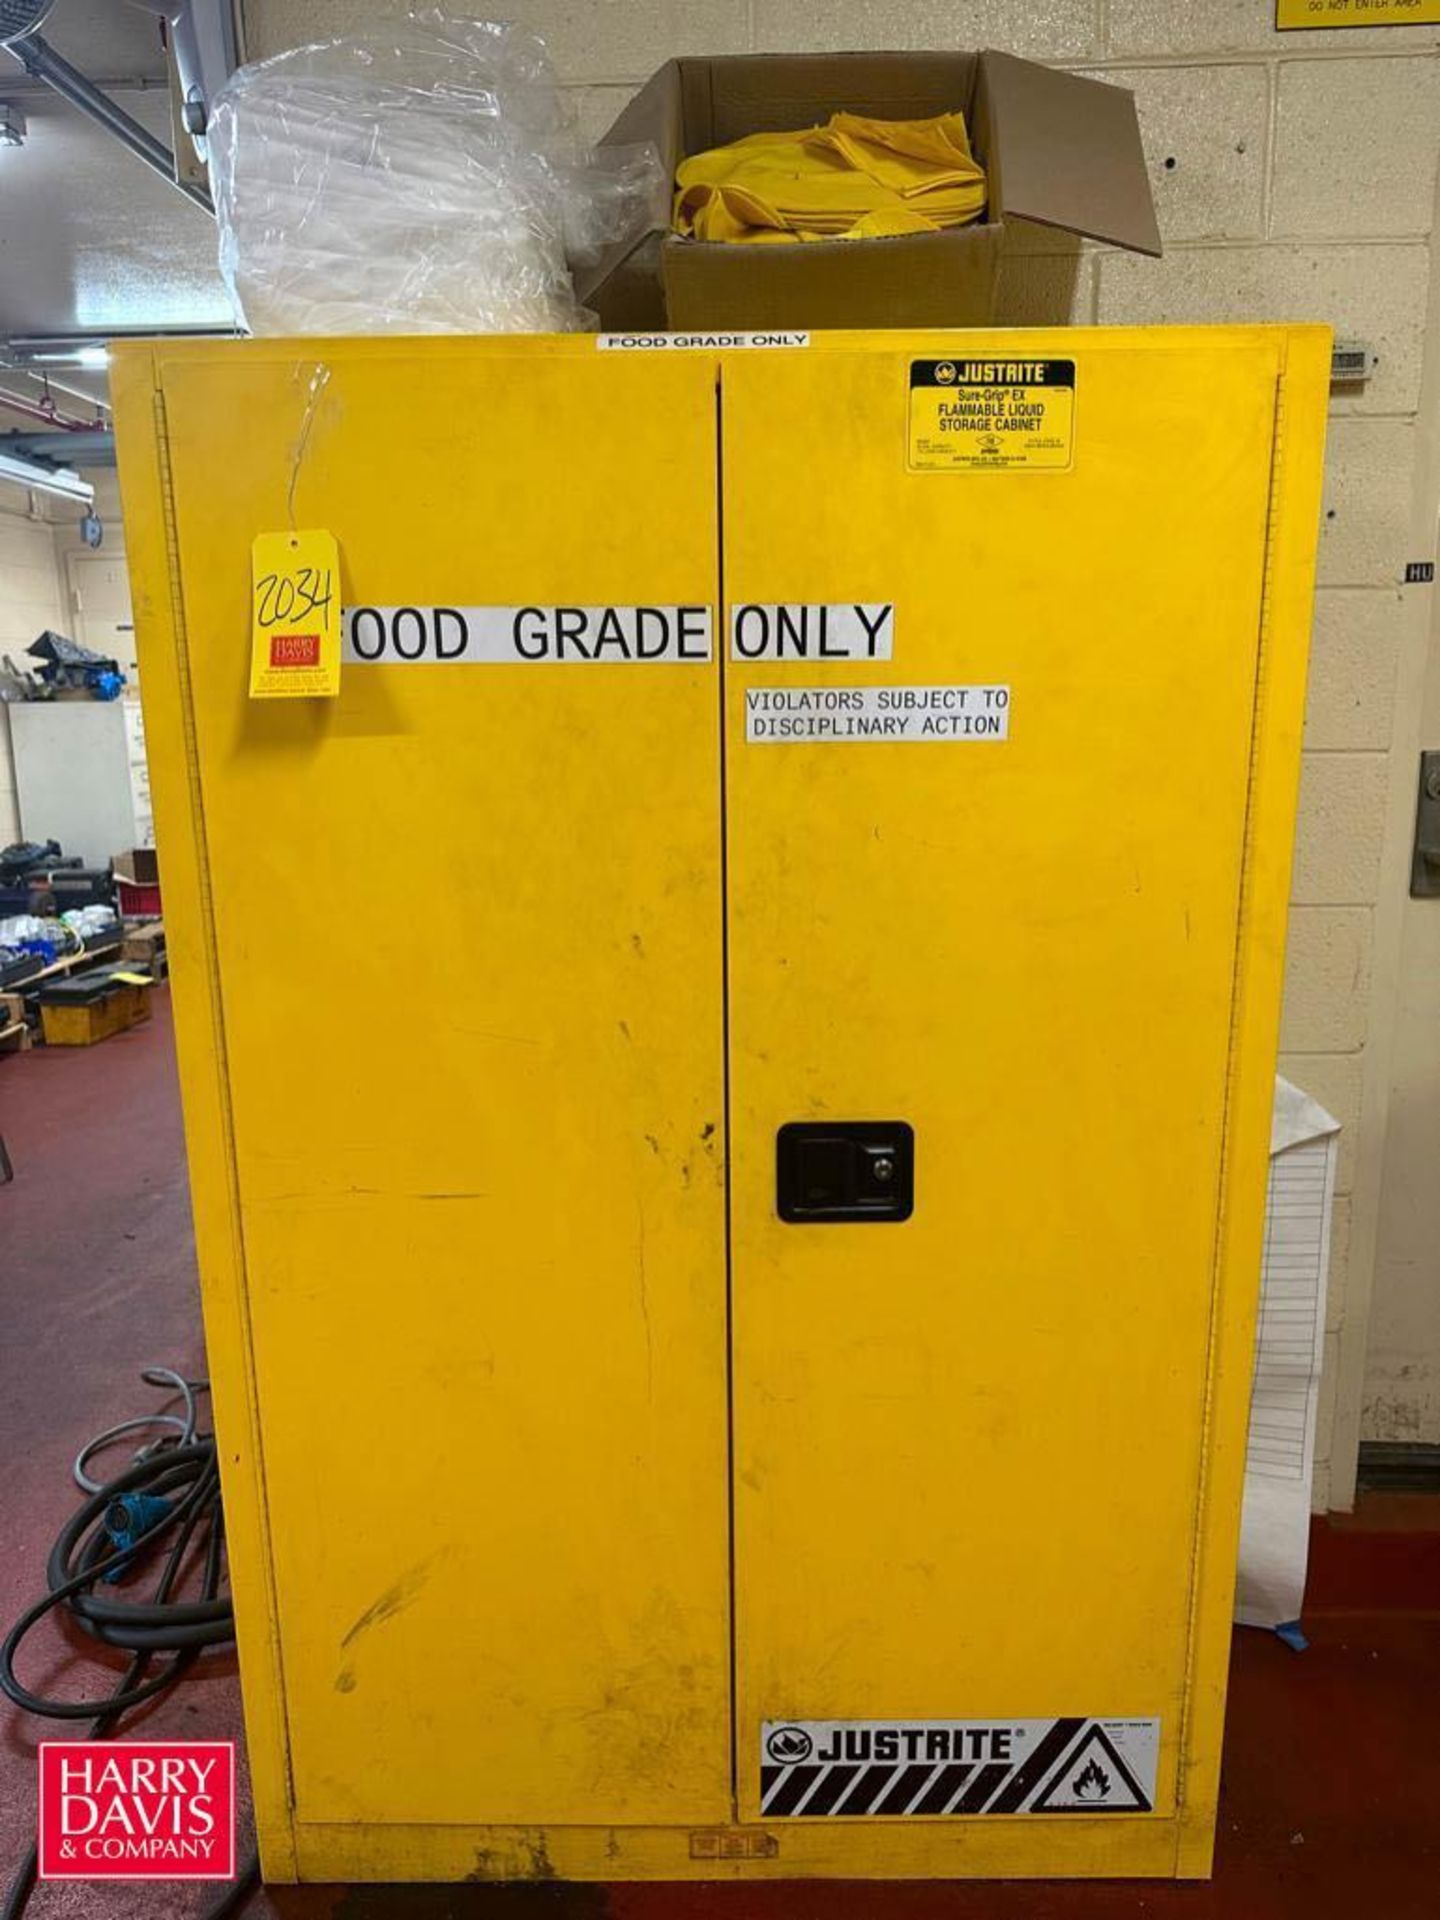 Flammable Liquid Storage Cabinet: 65" x 43” x 18” with Assorted Lubricants - Rigging Fee: $200 - Image 2 of 2